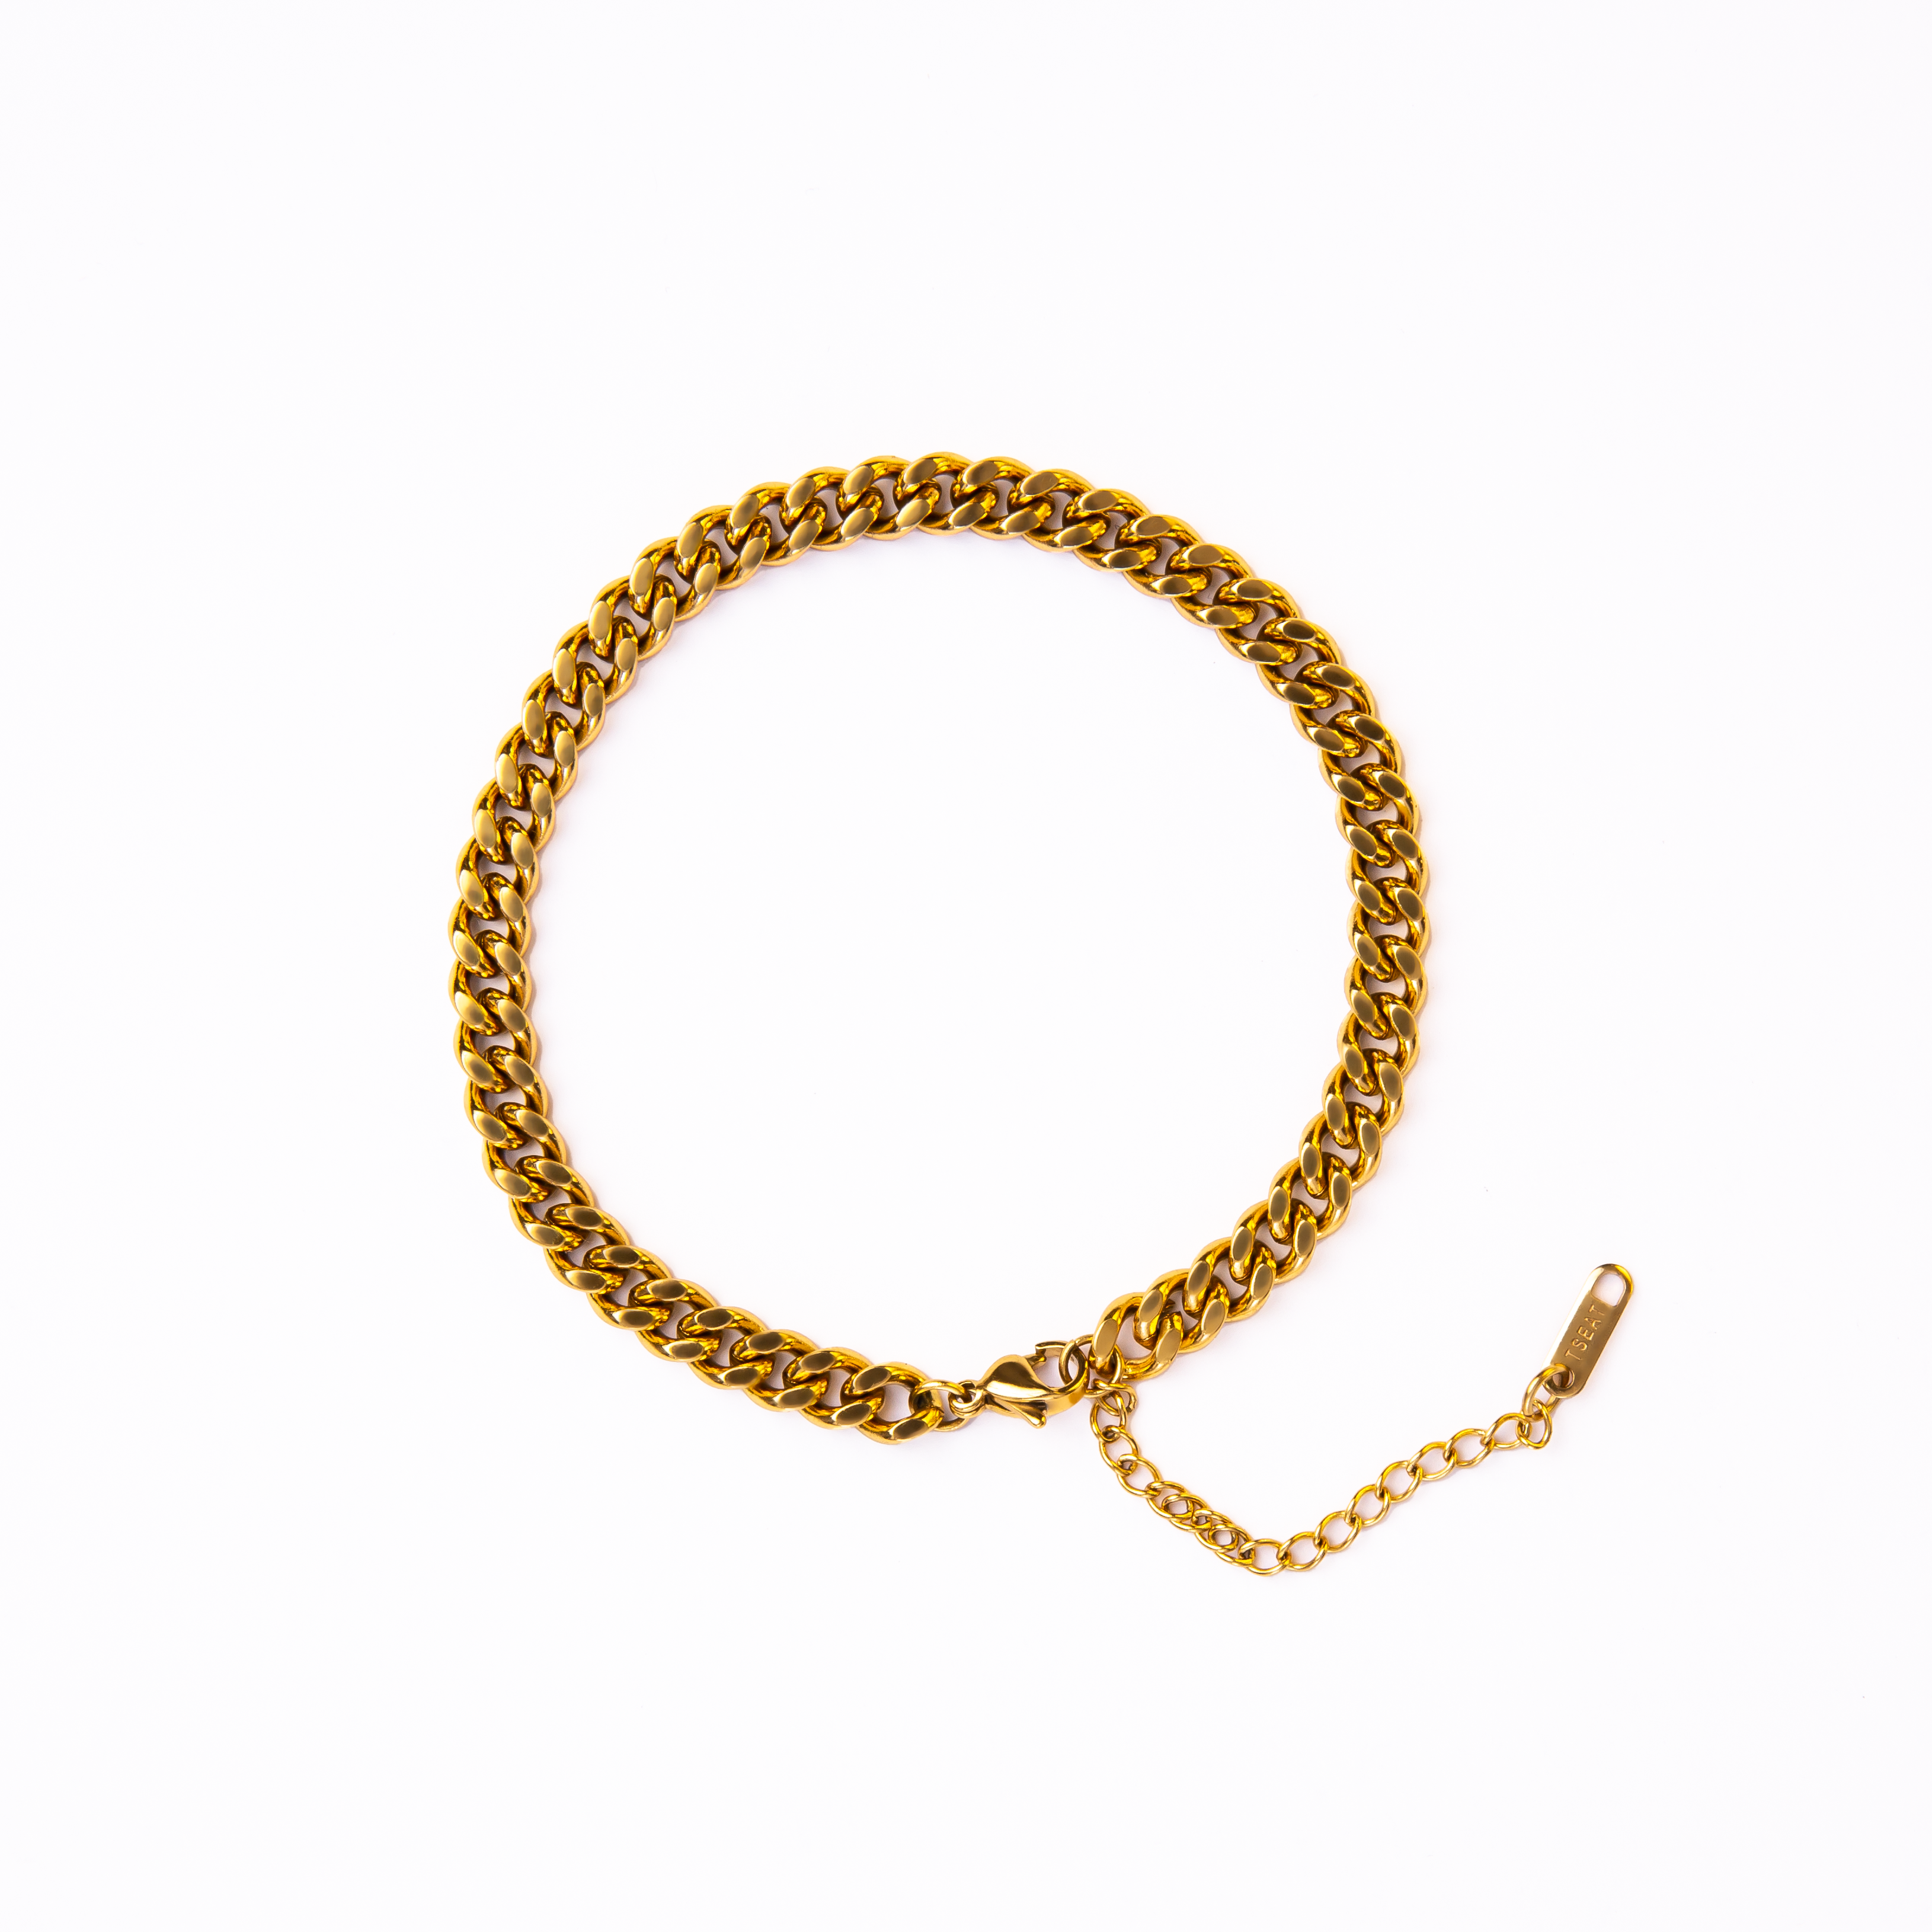 Parisian fashion has always been inspired by the runway. Our latest collection is no exception. We designed this layering anklet with our medium chain, to make a sweet and delicate accent on your Parisian look.  18k gold plated on stainless steel. Length: 20 CM Extender: 5CM This product is hypoallergenic and tarnish resistant. 